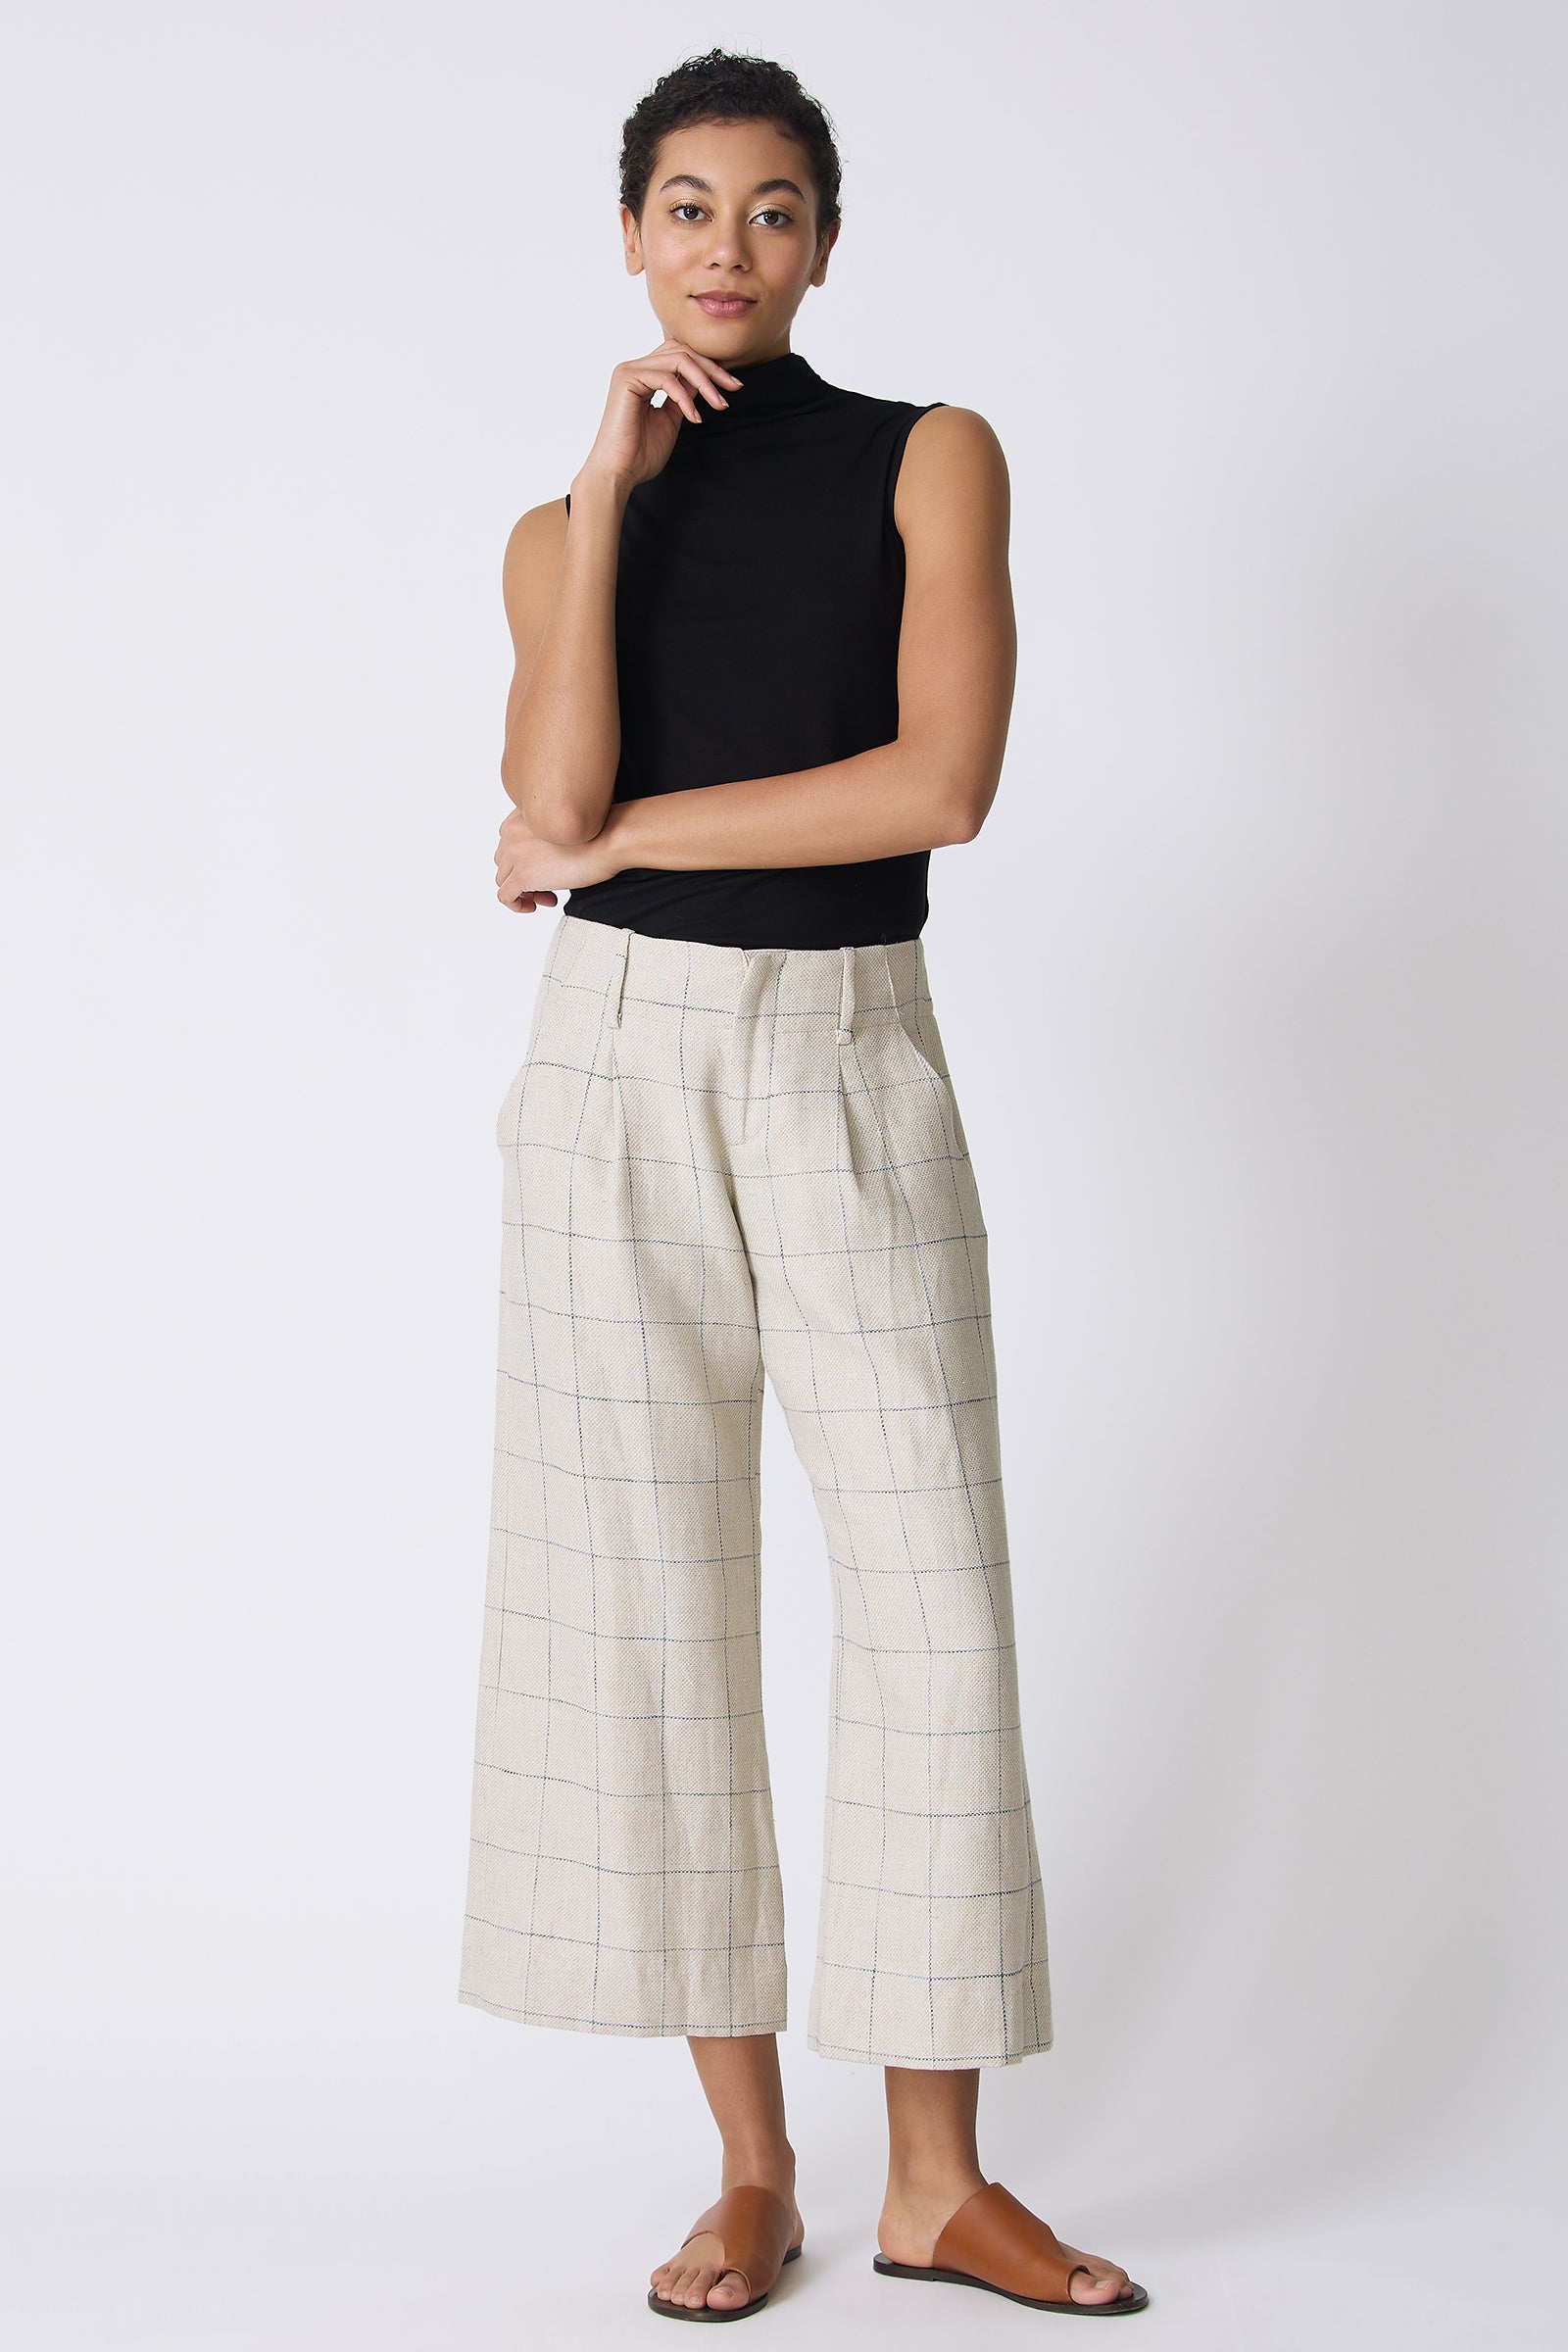 Kal Rieman Gabby Crop Pant in Windowpane on model with hand under chin full front view